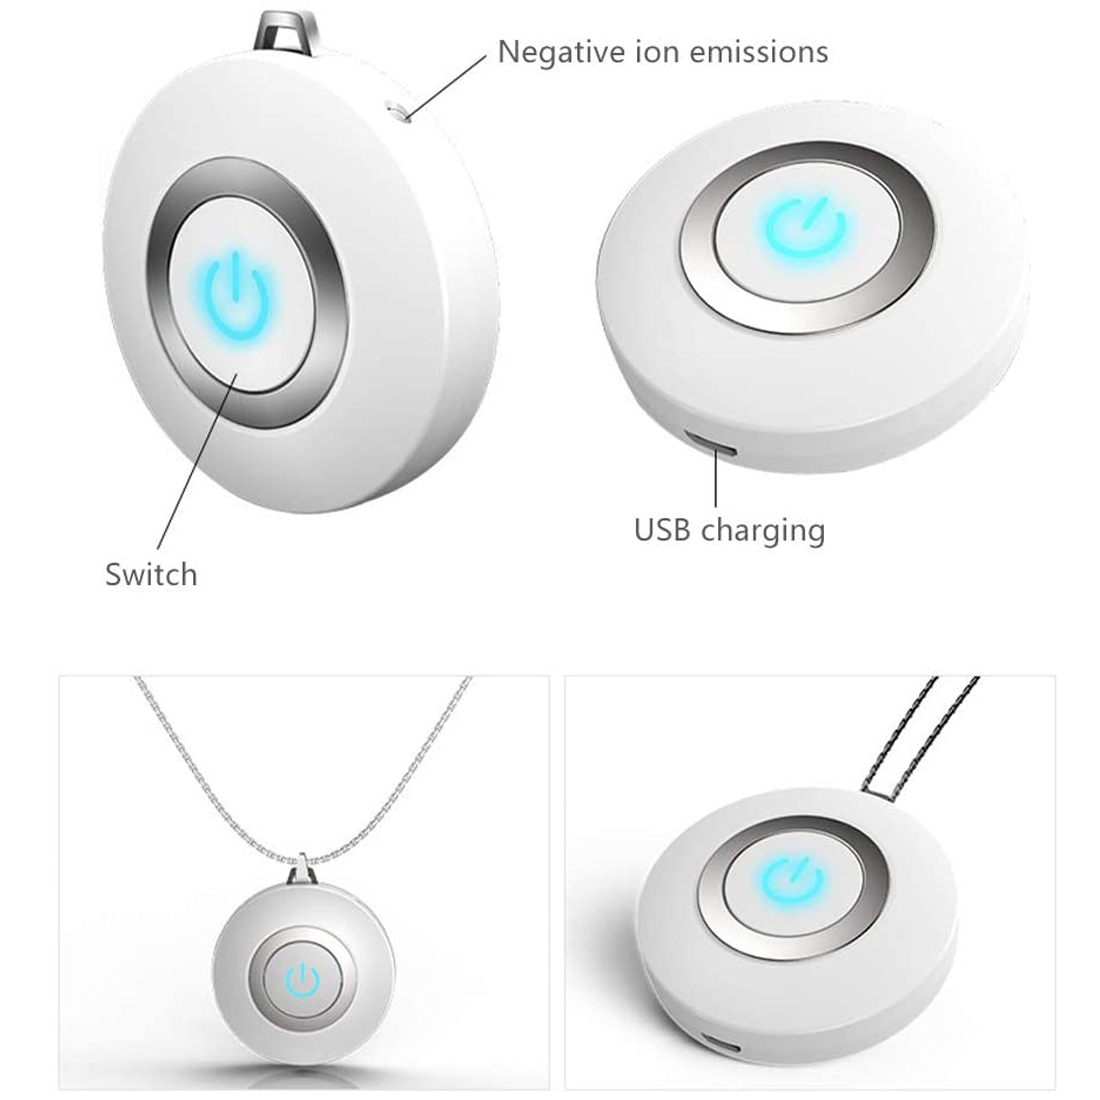 USB Portable Wearable Air Purifier Personal Mini Air Necklace Negative Ion Air Freshener No Radiation Low Noise for Adults 1pc